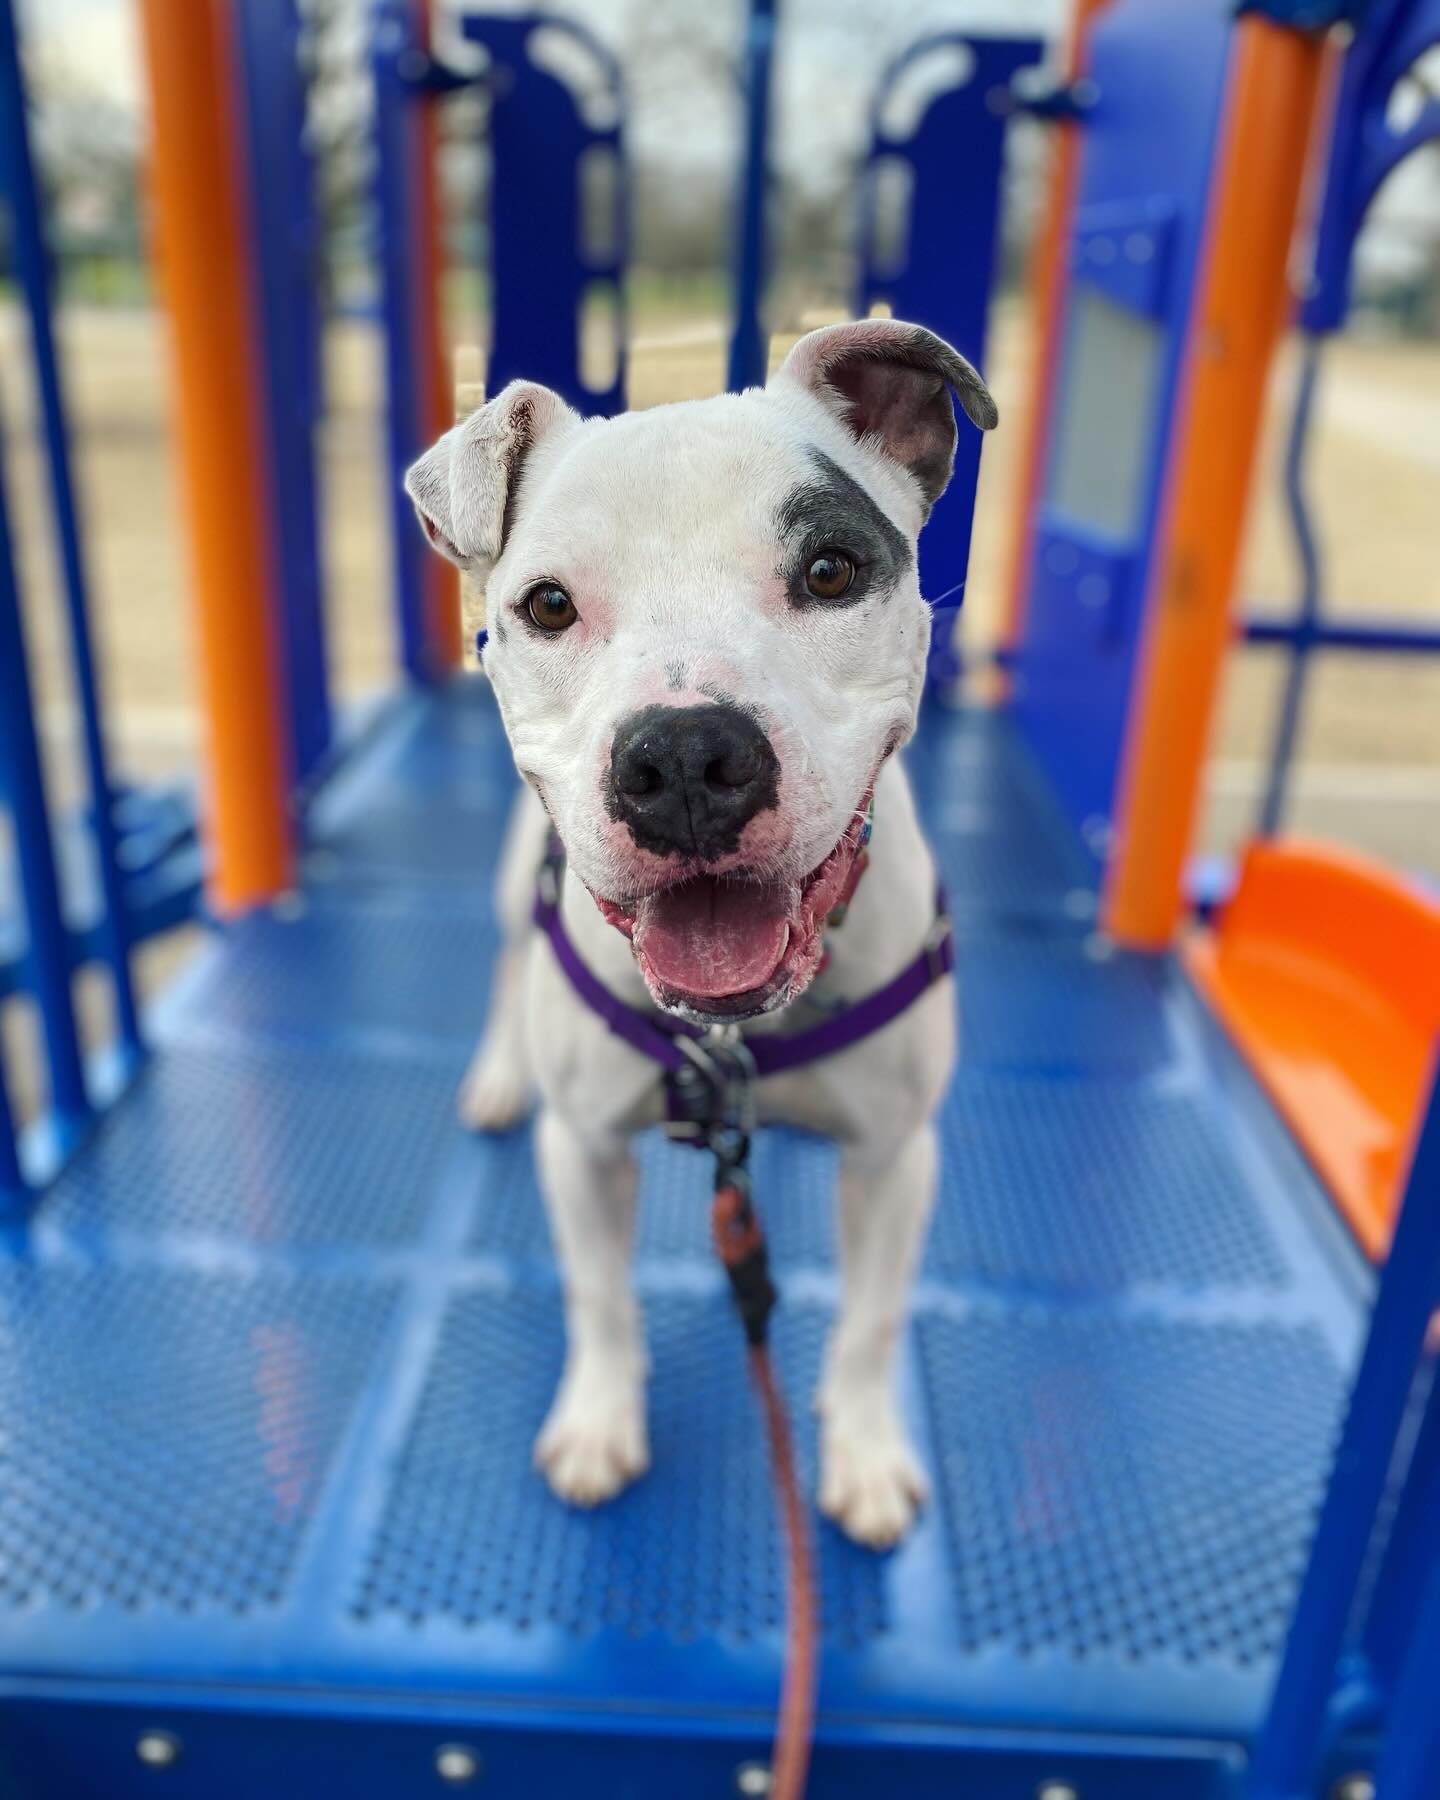 A few weeks ago, we got to take @austinanimalcenter #adoptable boy Binkles on two sponsored outings thanks to one of his best #volunteer friends. 🥰

This morning, she messaged us that this sweet buddy is still at the shelter and feeling pretty stres